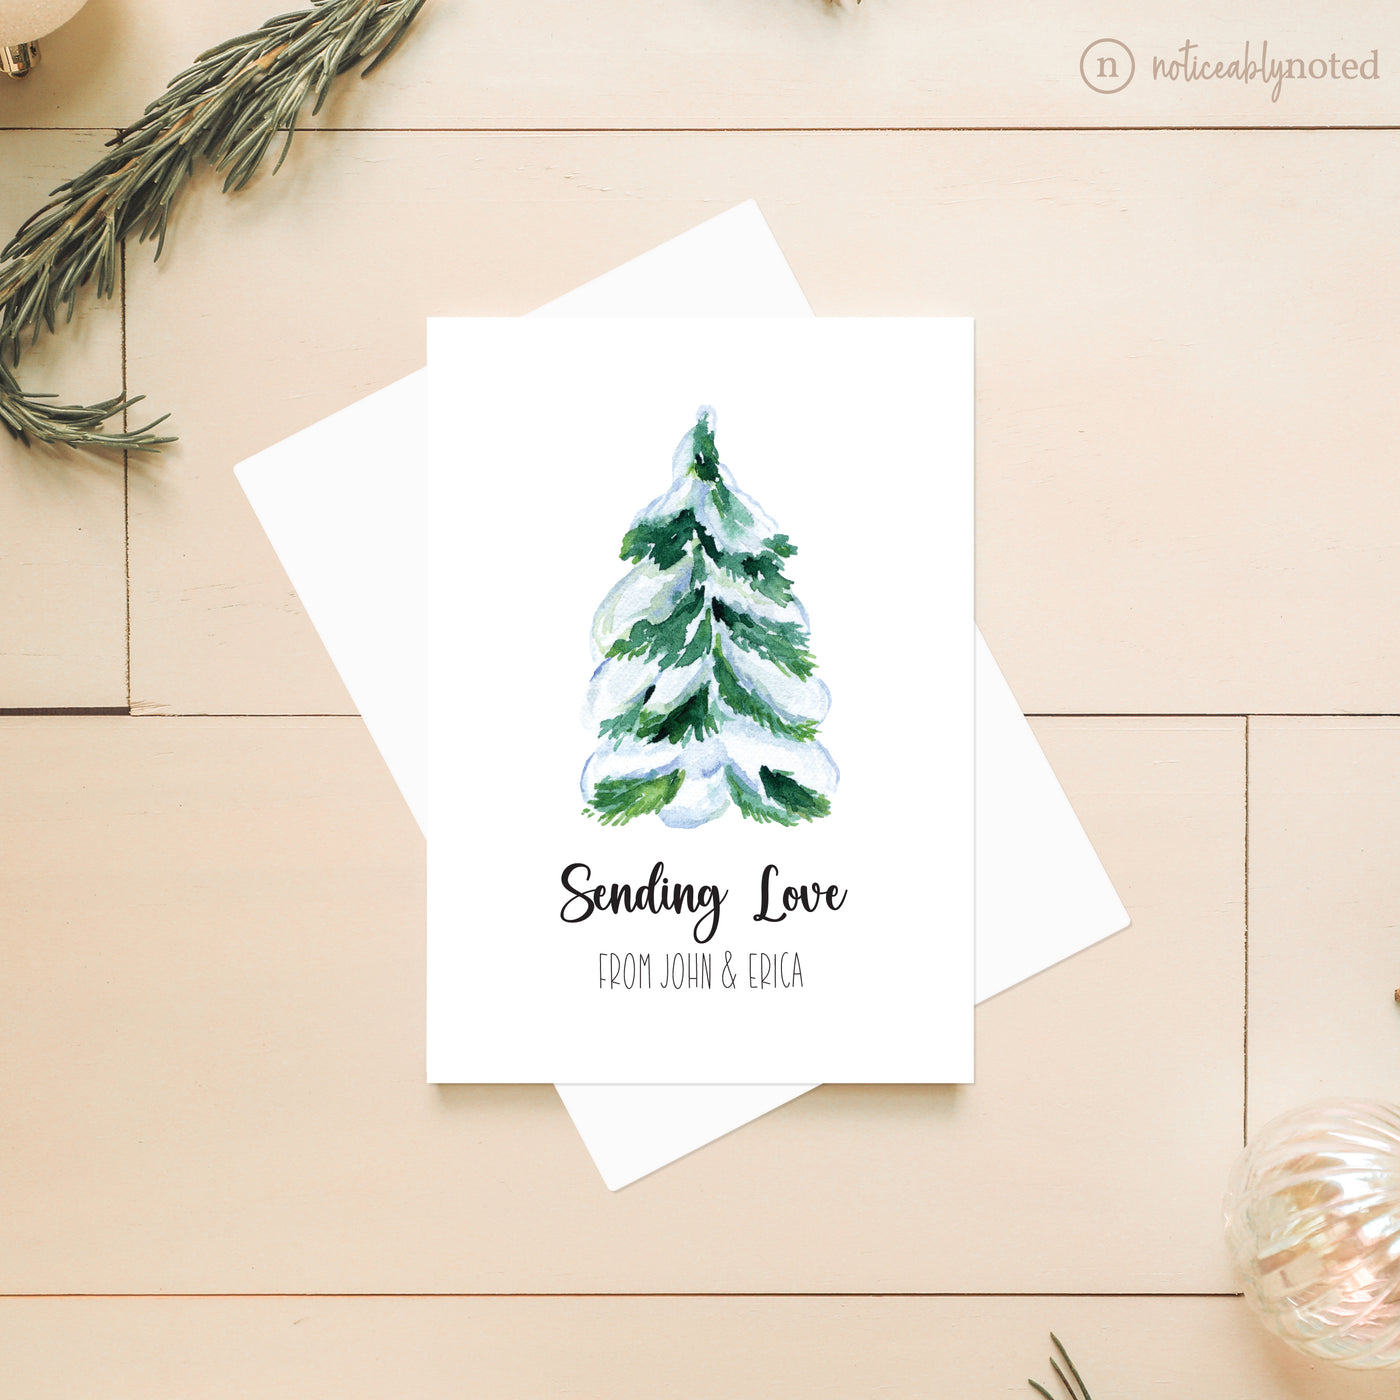 Tree Holiday Card | Noticeably Noted